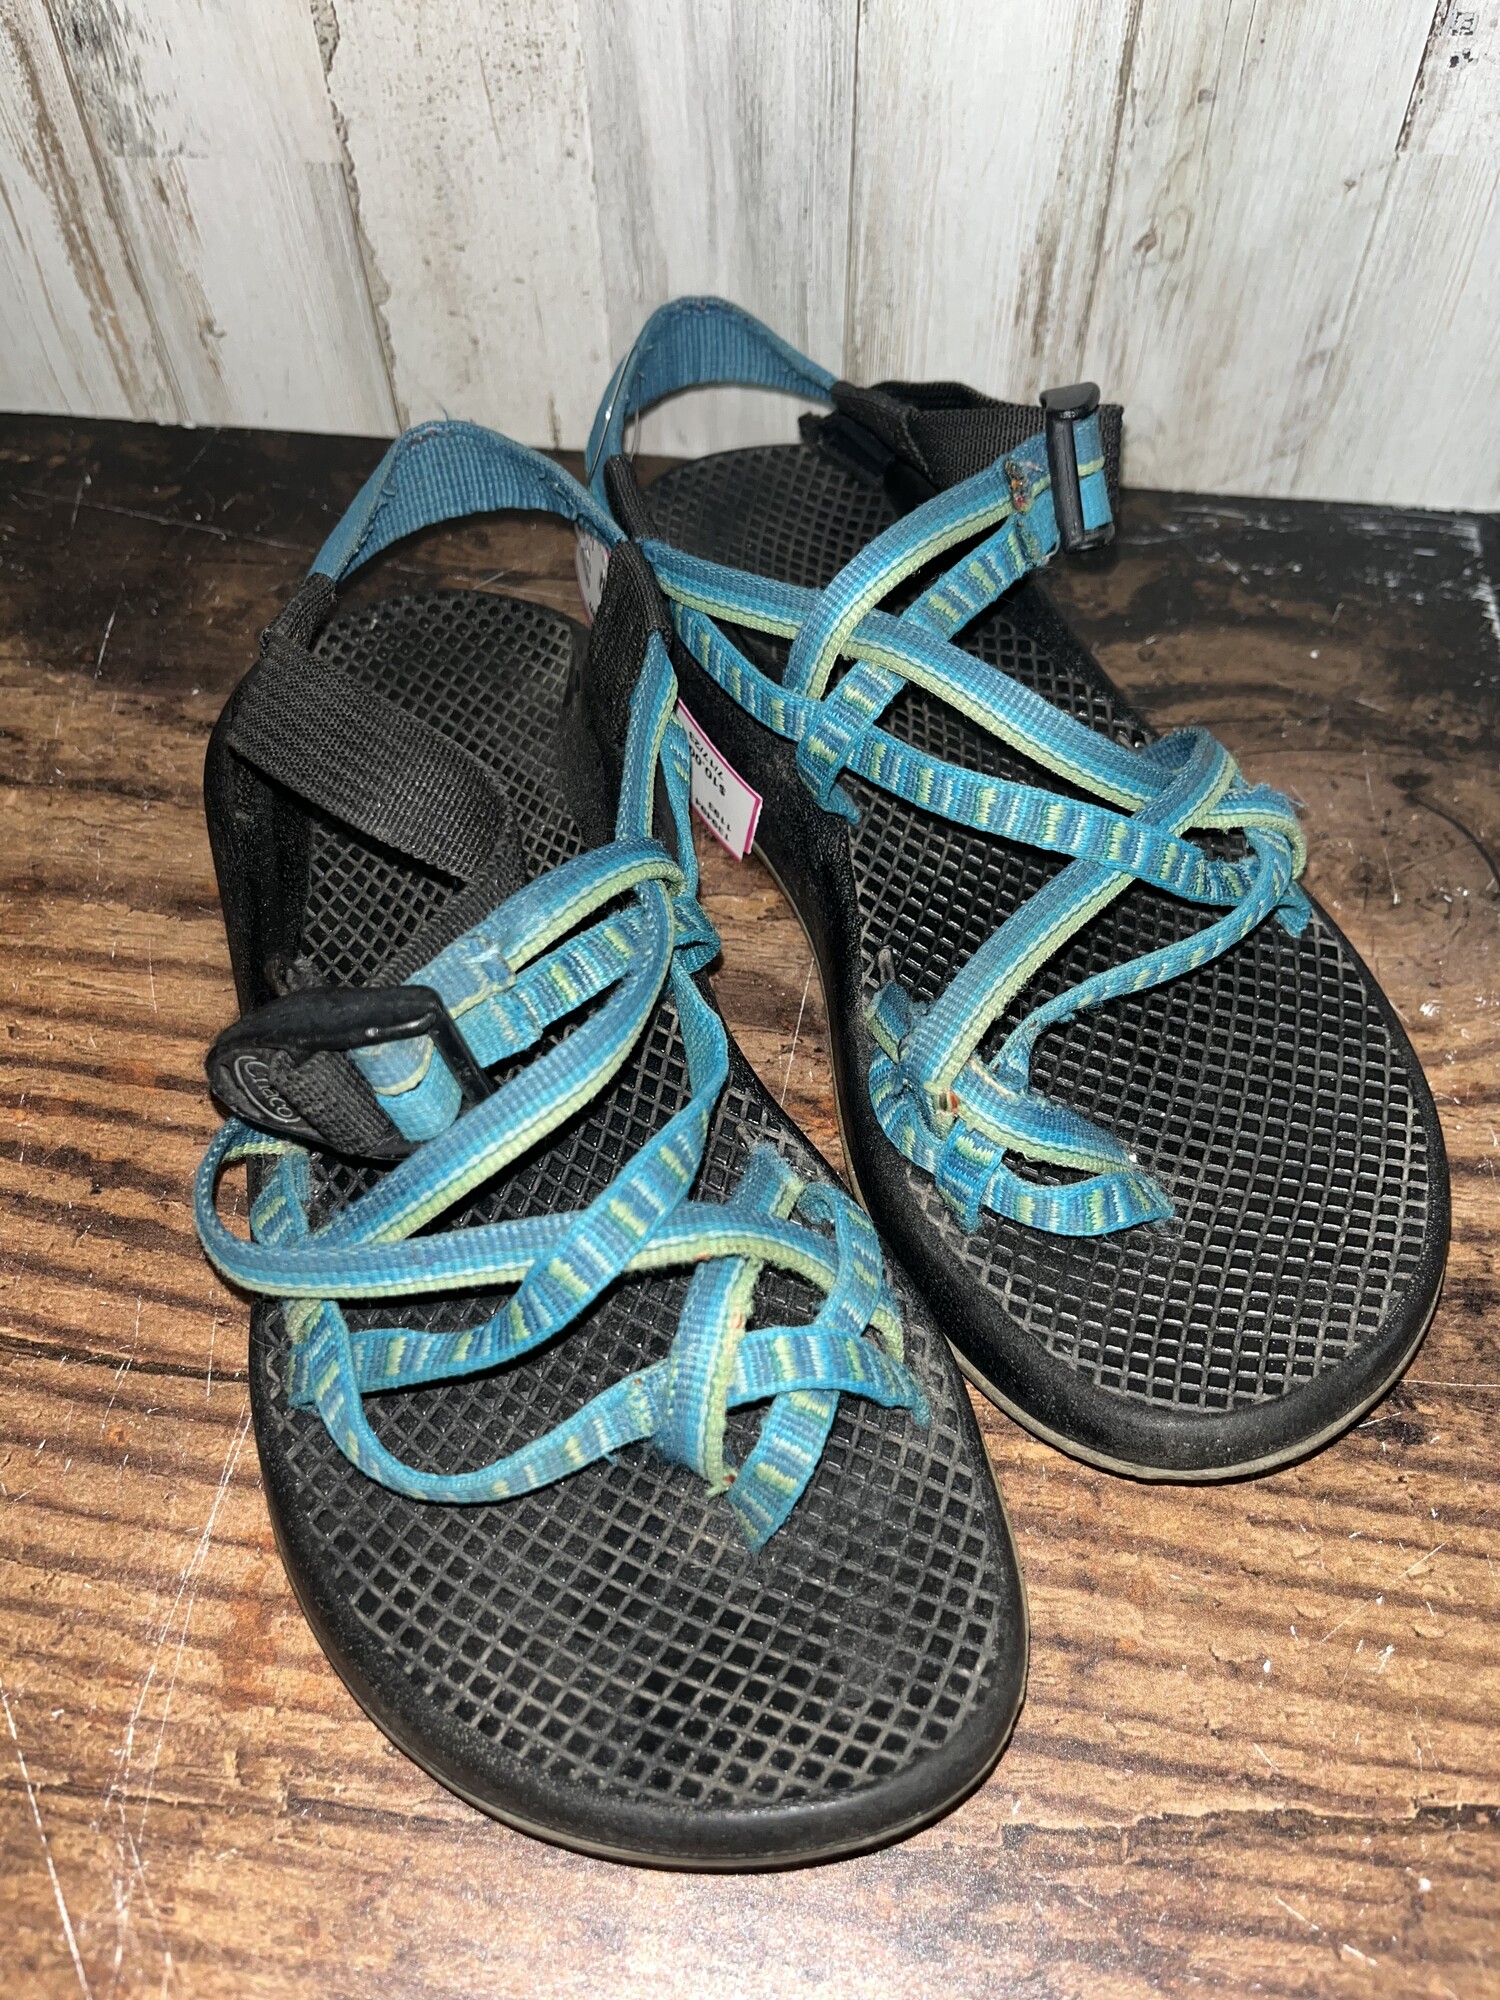 A7 Teal/Green Sandals | The Plaid Pecan